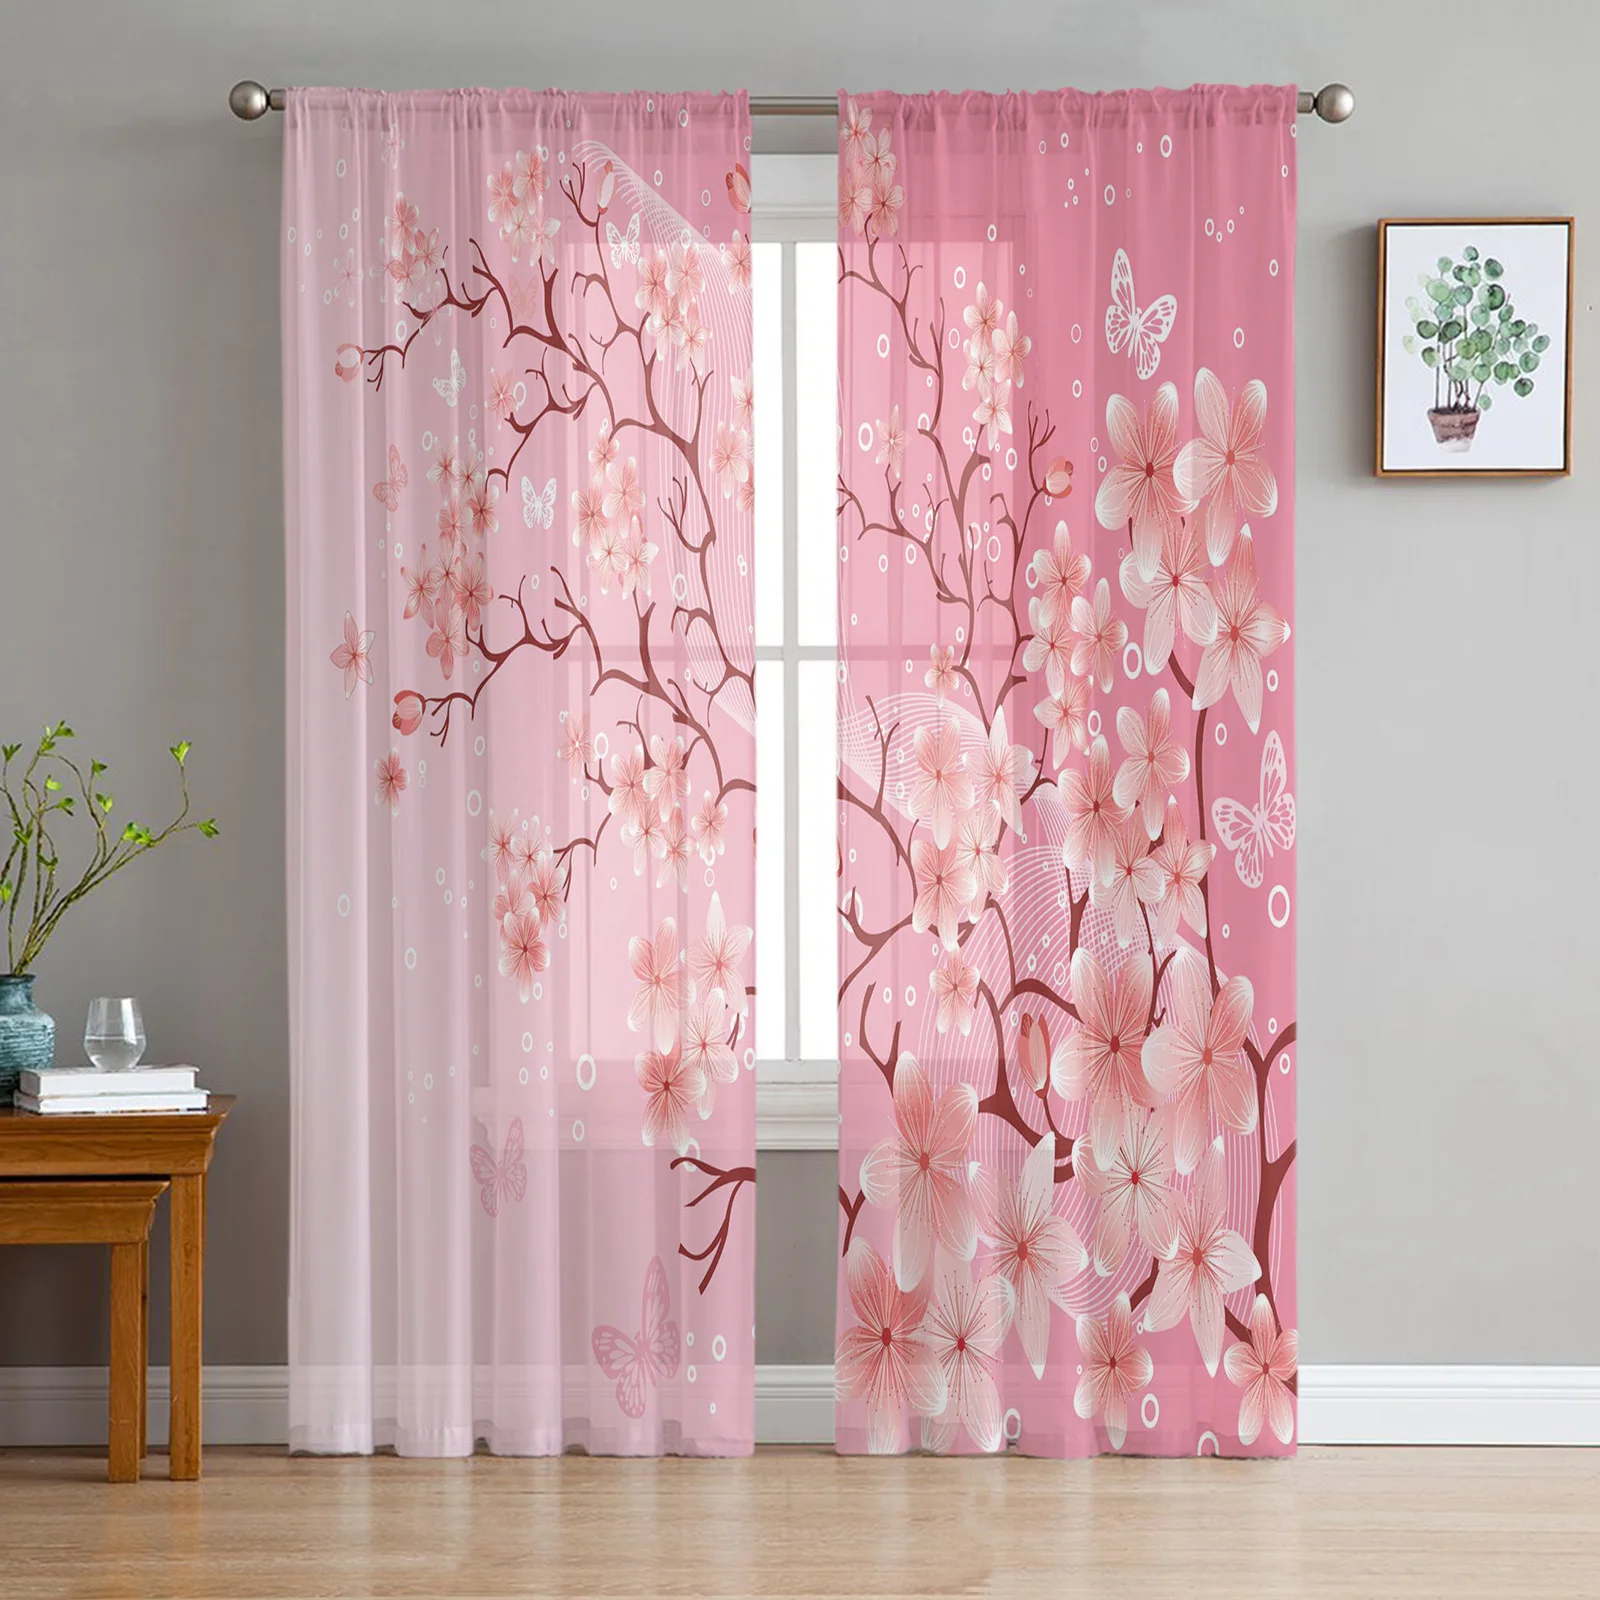 

Cherry Blossom Butterfly Pink Tulle Curtains For Living Room Bedroom Voile Curtain Home Decoration Sheer Balcony Door Curtain